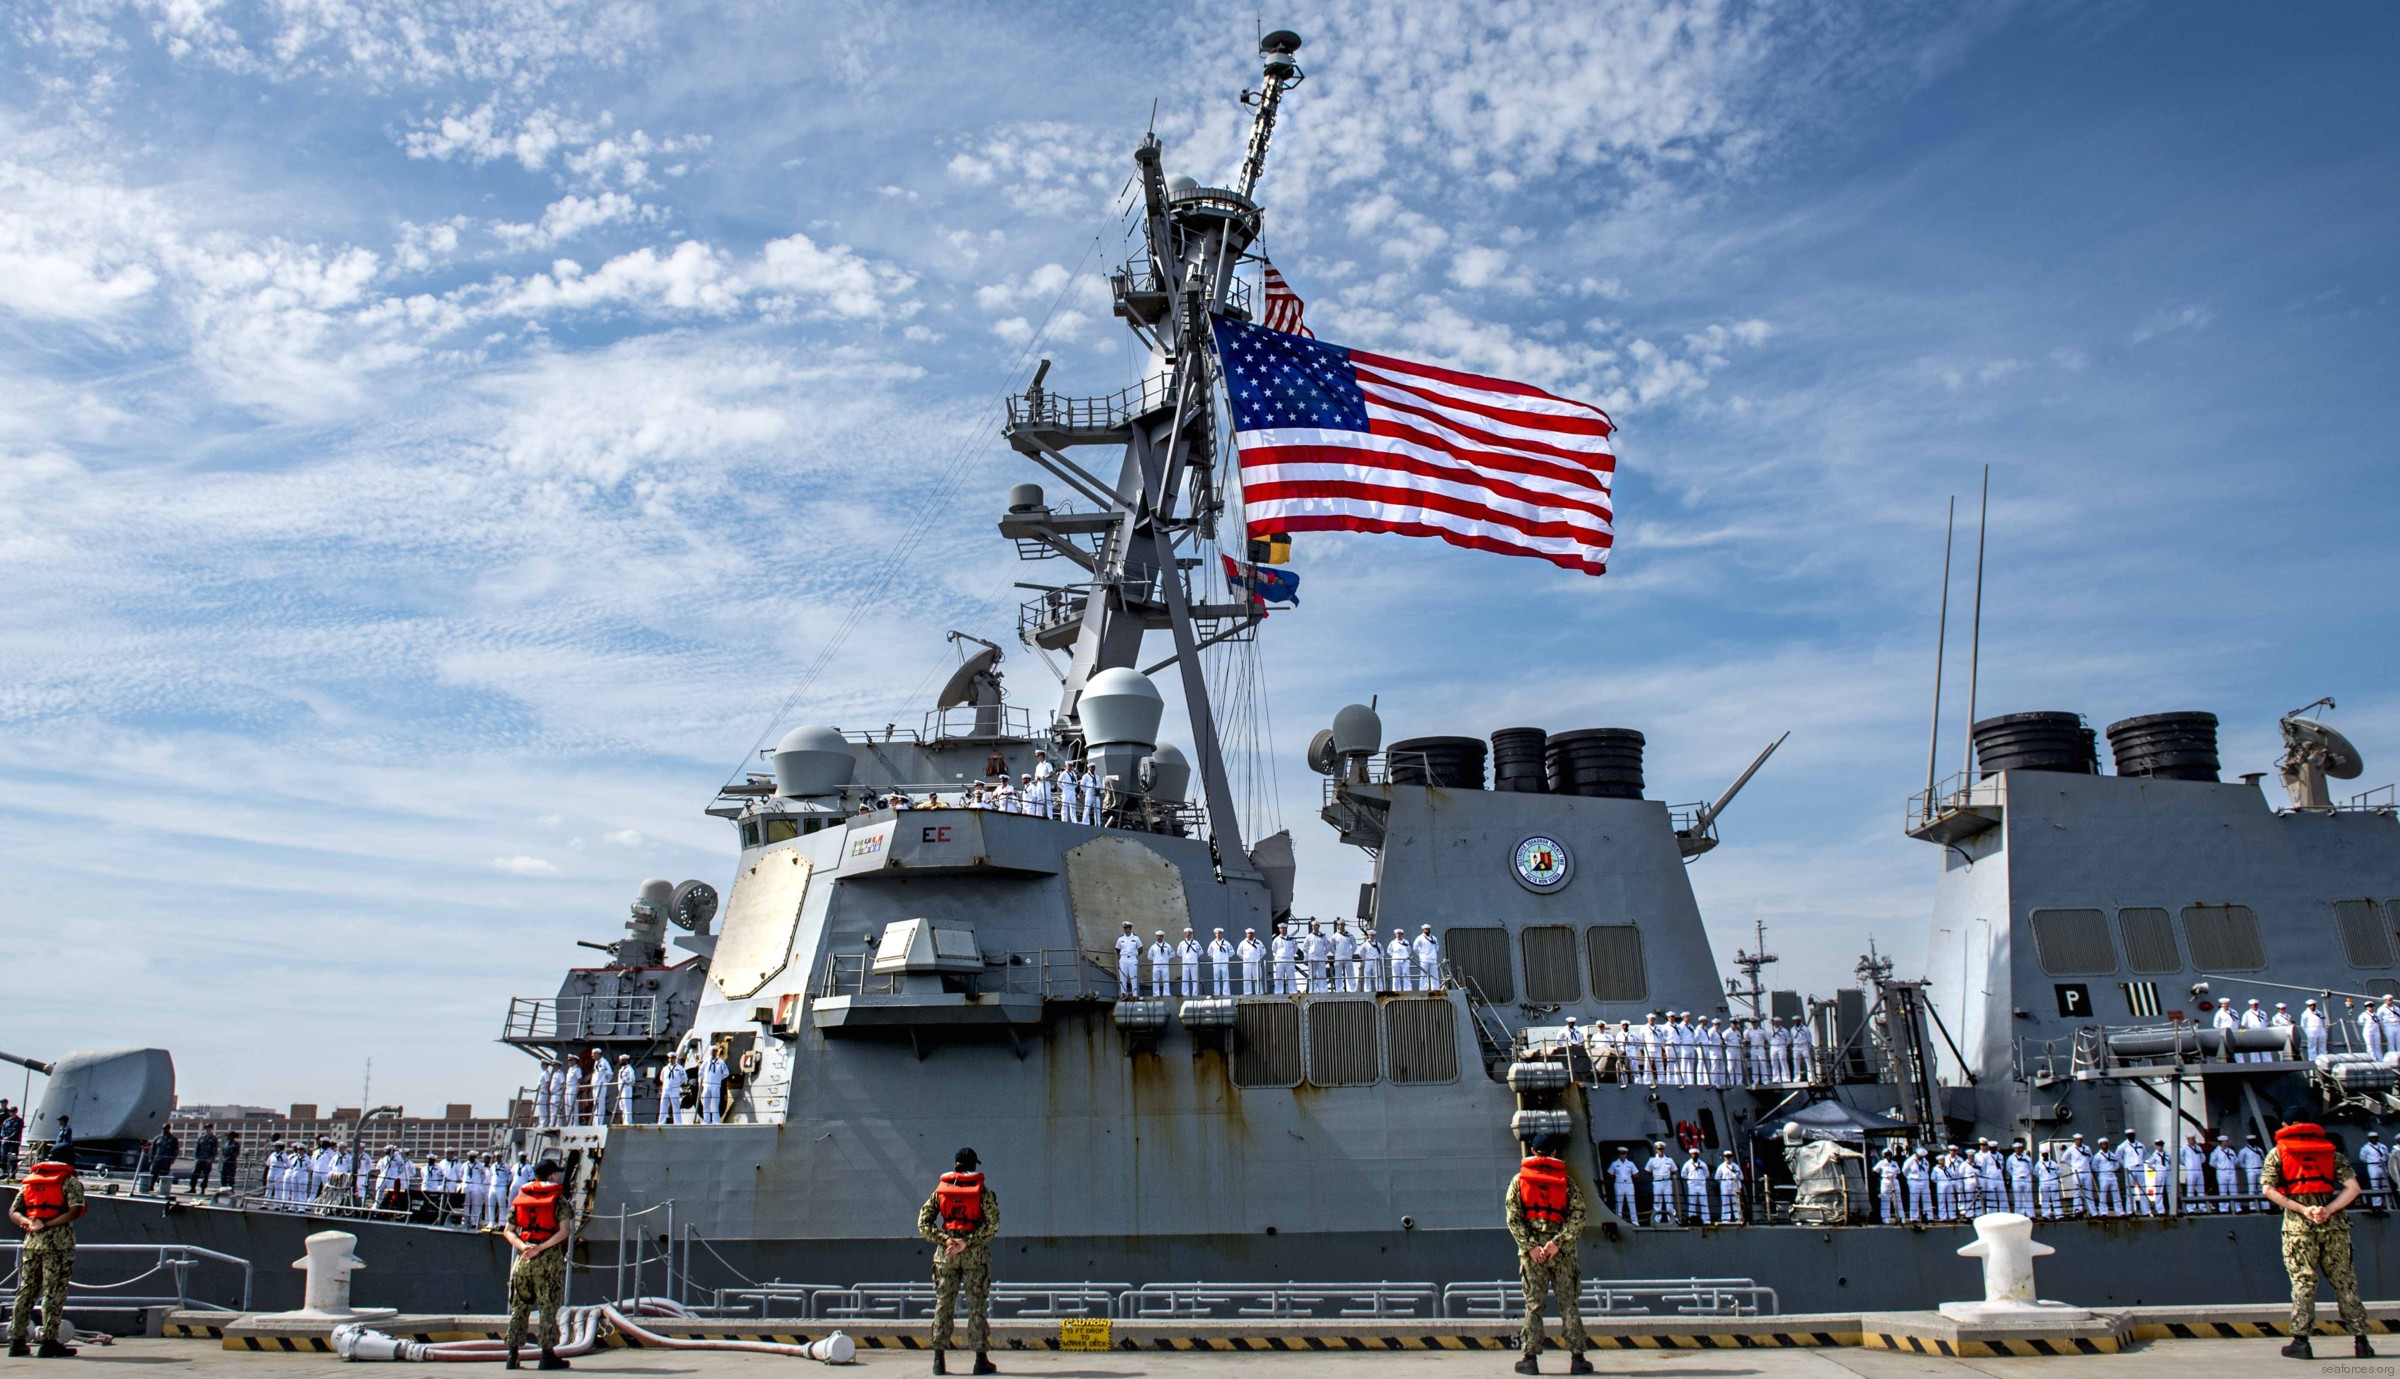 ddg-58 uss laboon arleigh burke class guided missile destroyer us navy 88 norfolk naval station